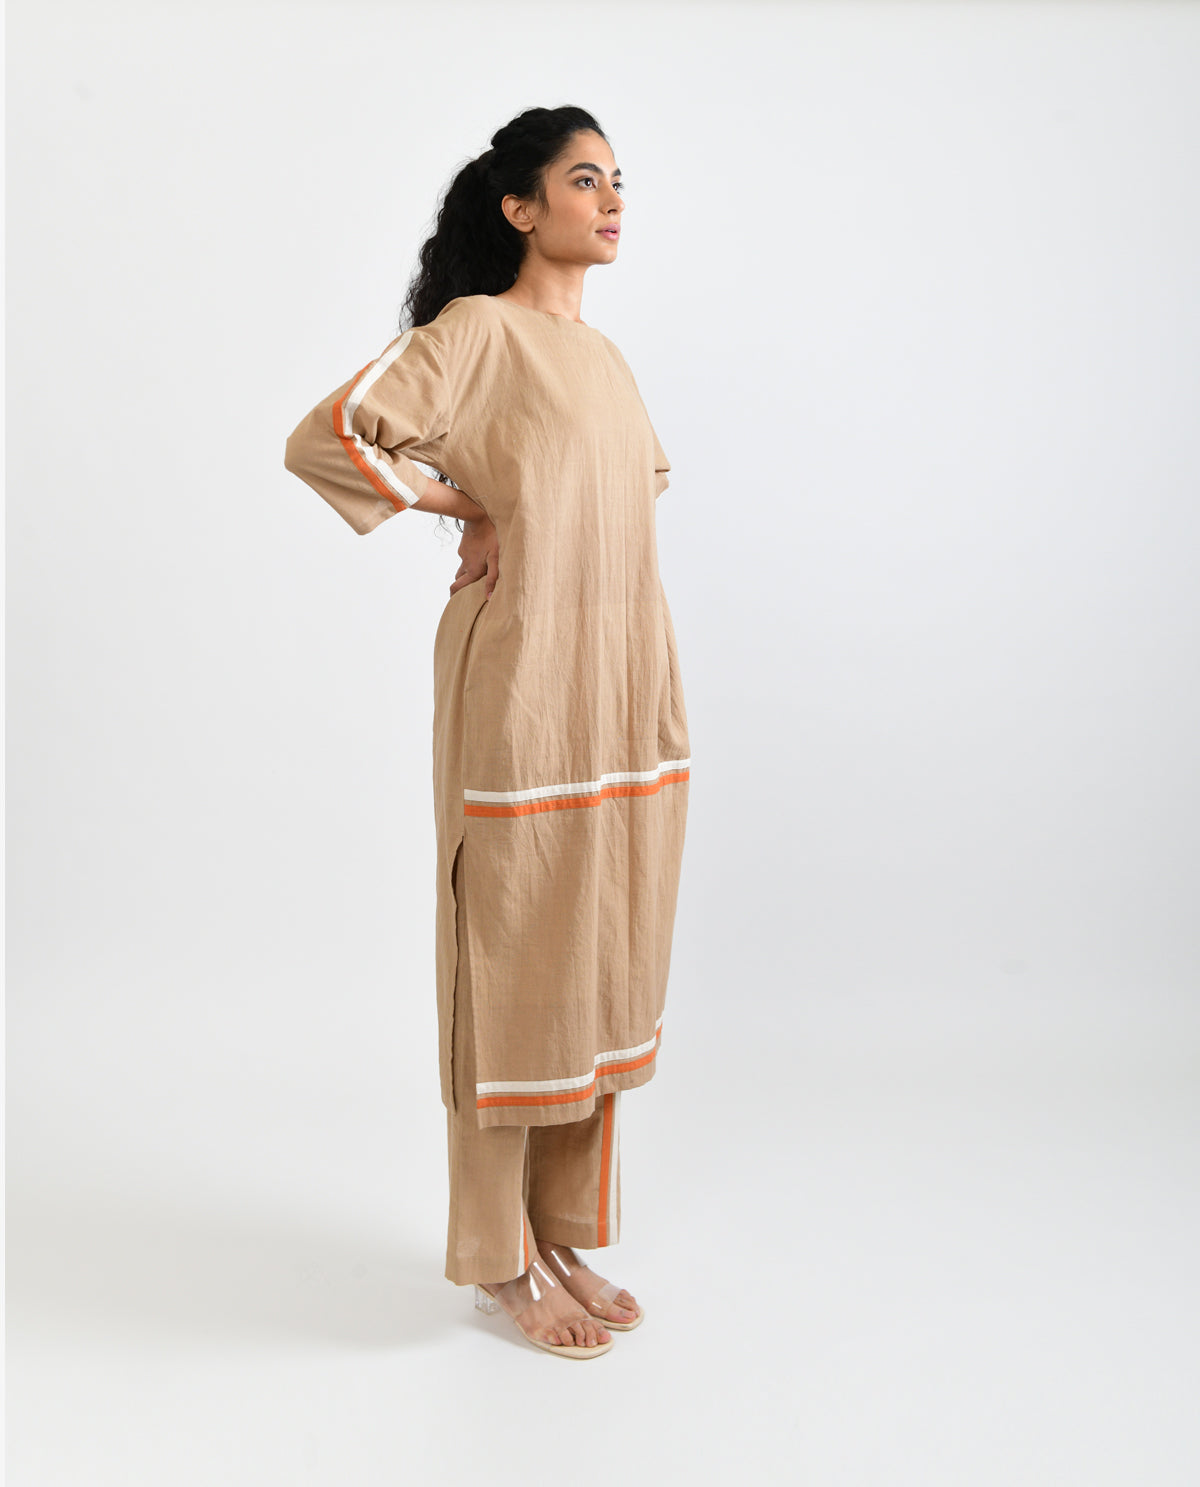 Beige Solid Co-ord Set at Kamakhyaa by Rias Jaipur. This item is Beige, Casual Wear, Co-ord Sets, For Mother, Handloom Cotton, Handspun, Handwoven, Hue, Relaxed Fit, Solids, Stripes, Travel, Travel Co-ords, Womenswear